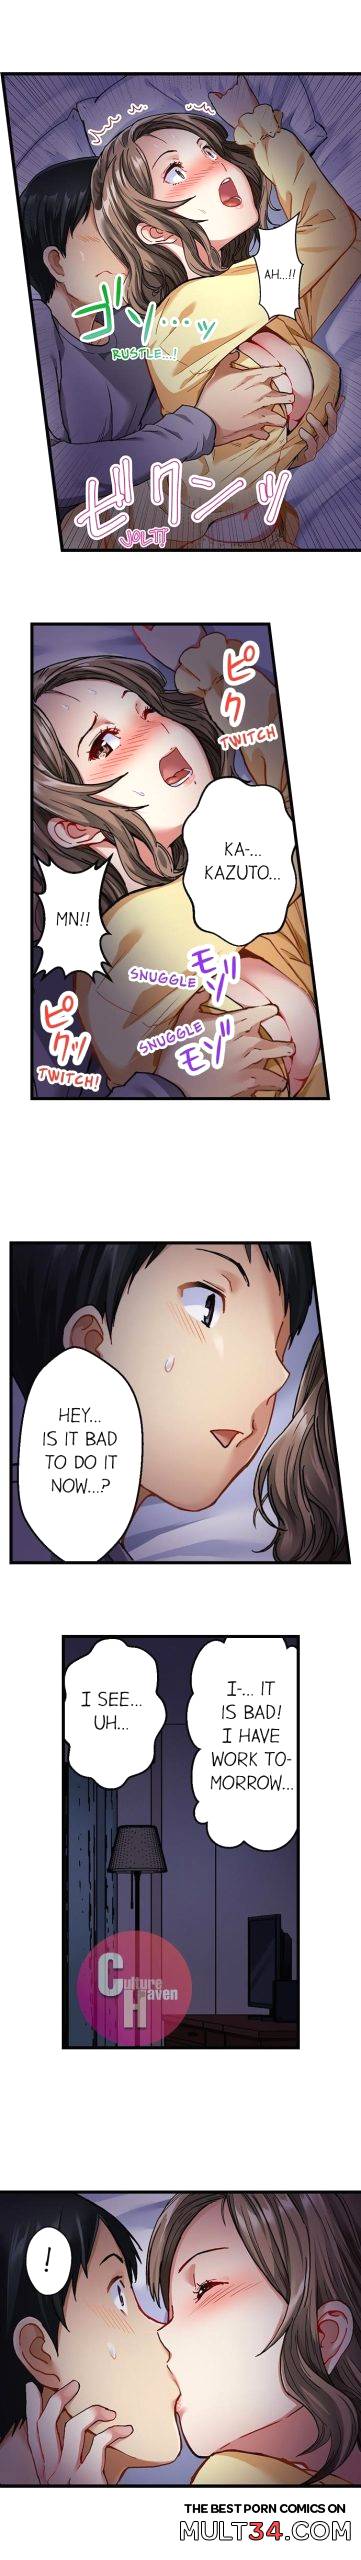 Selling My Wife’s Secrets Ch. 1-12 page 17